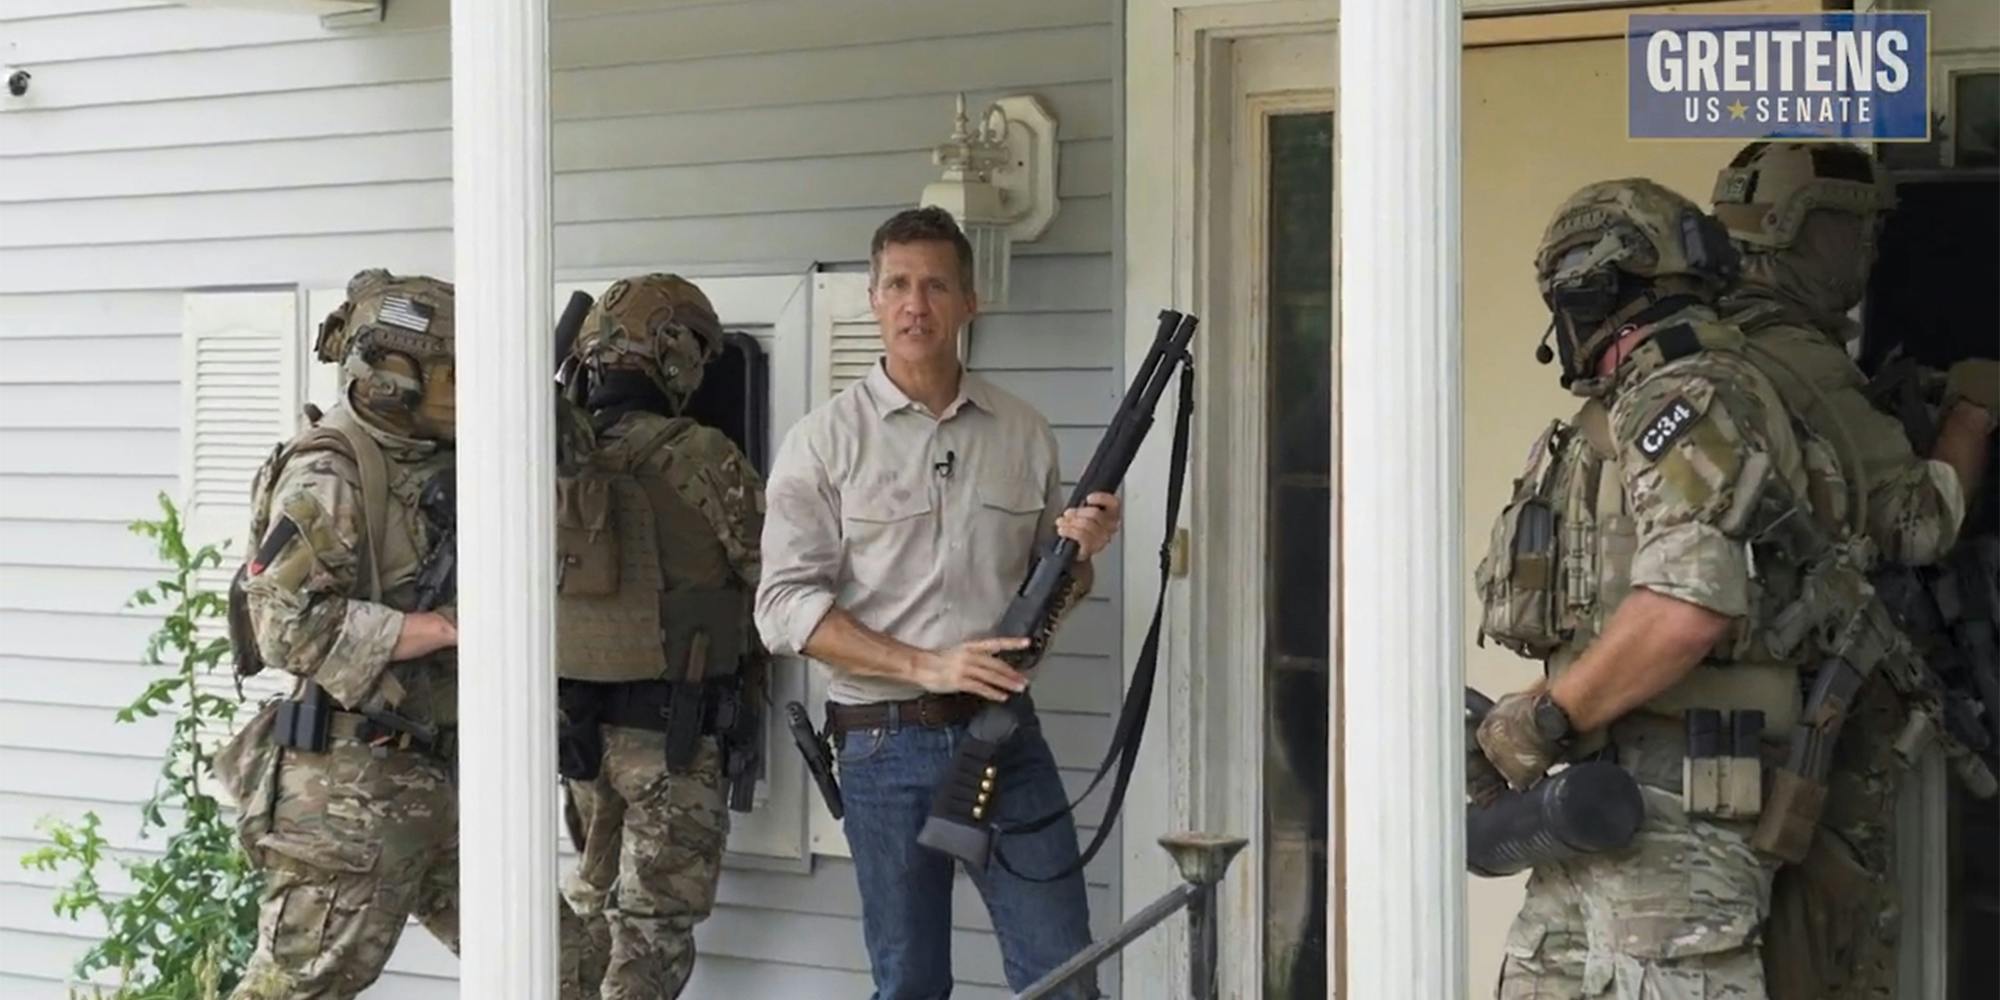 men with weapons on porch preparing to breach door with "Greitens US SENATE" logo